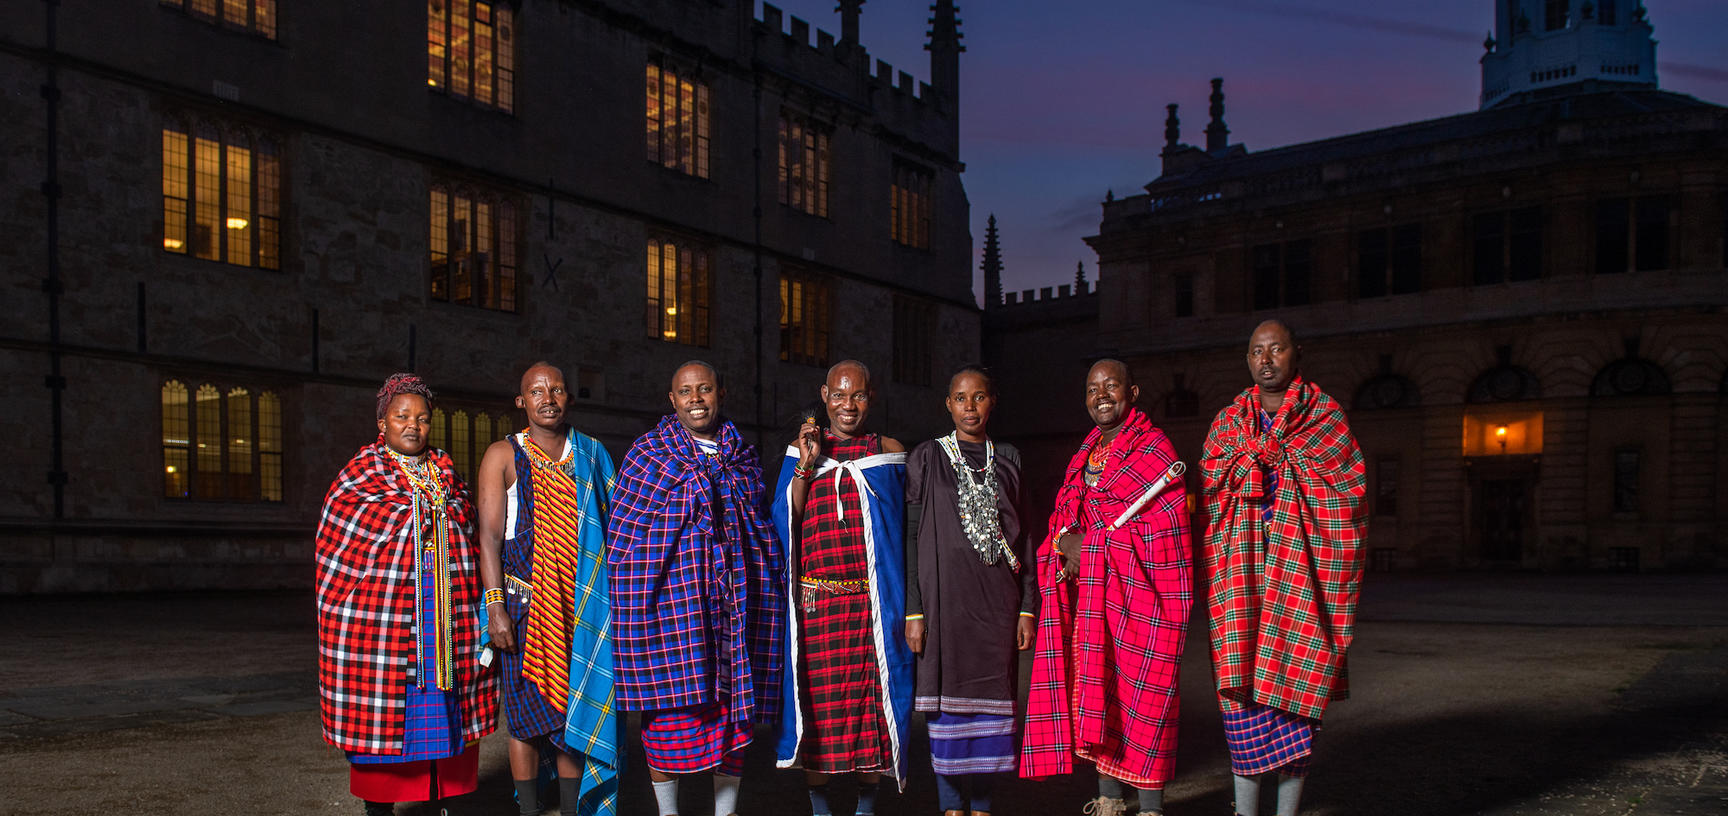 Maasai group at the Bodleian Library, Oxford